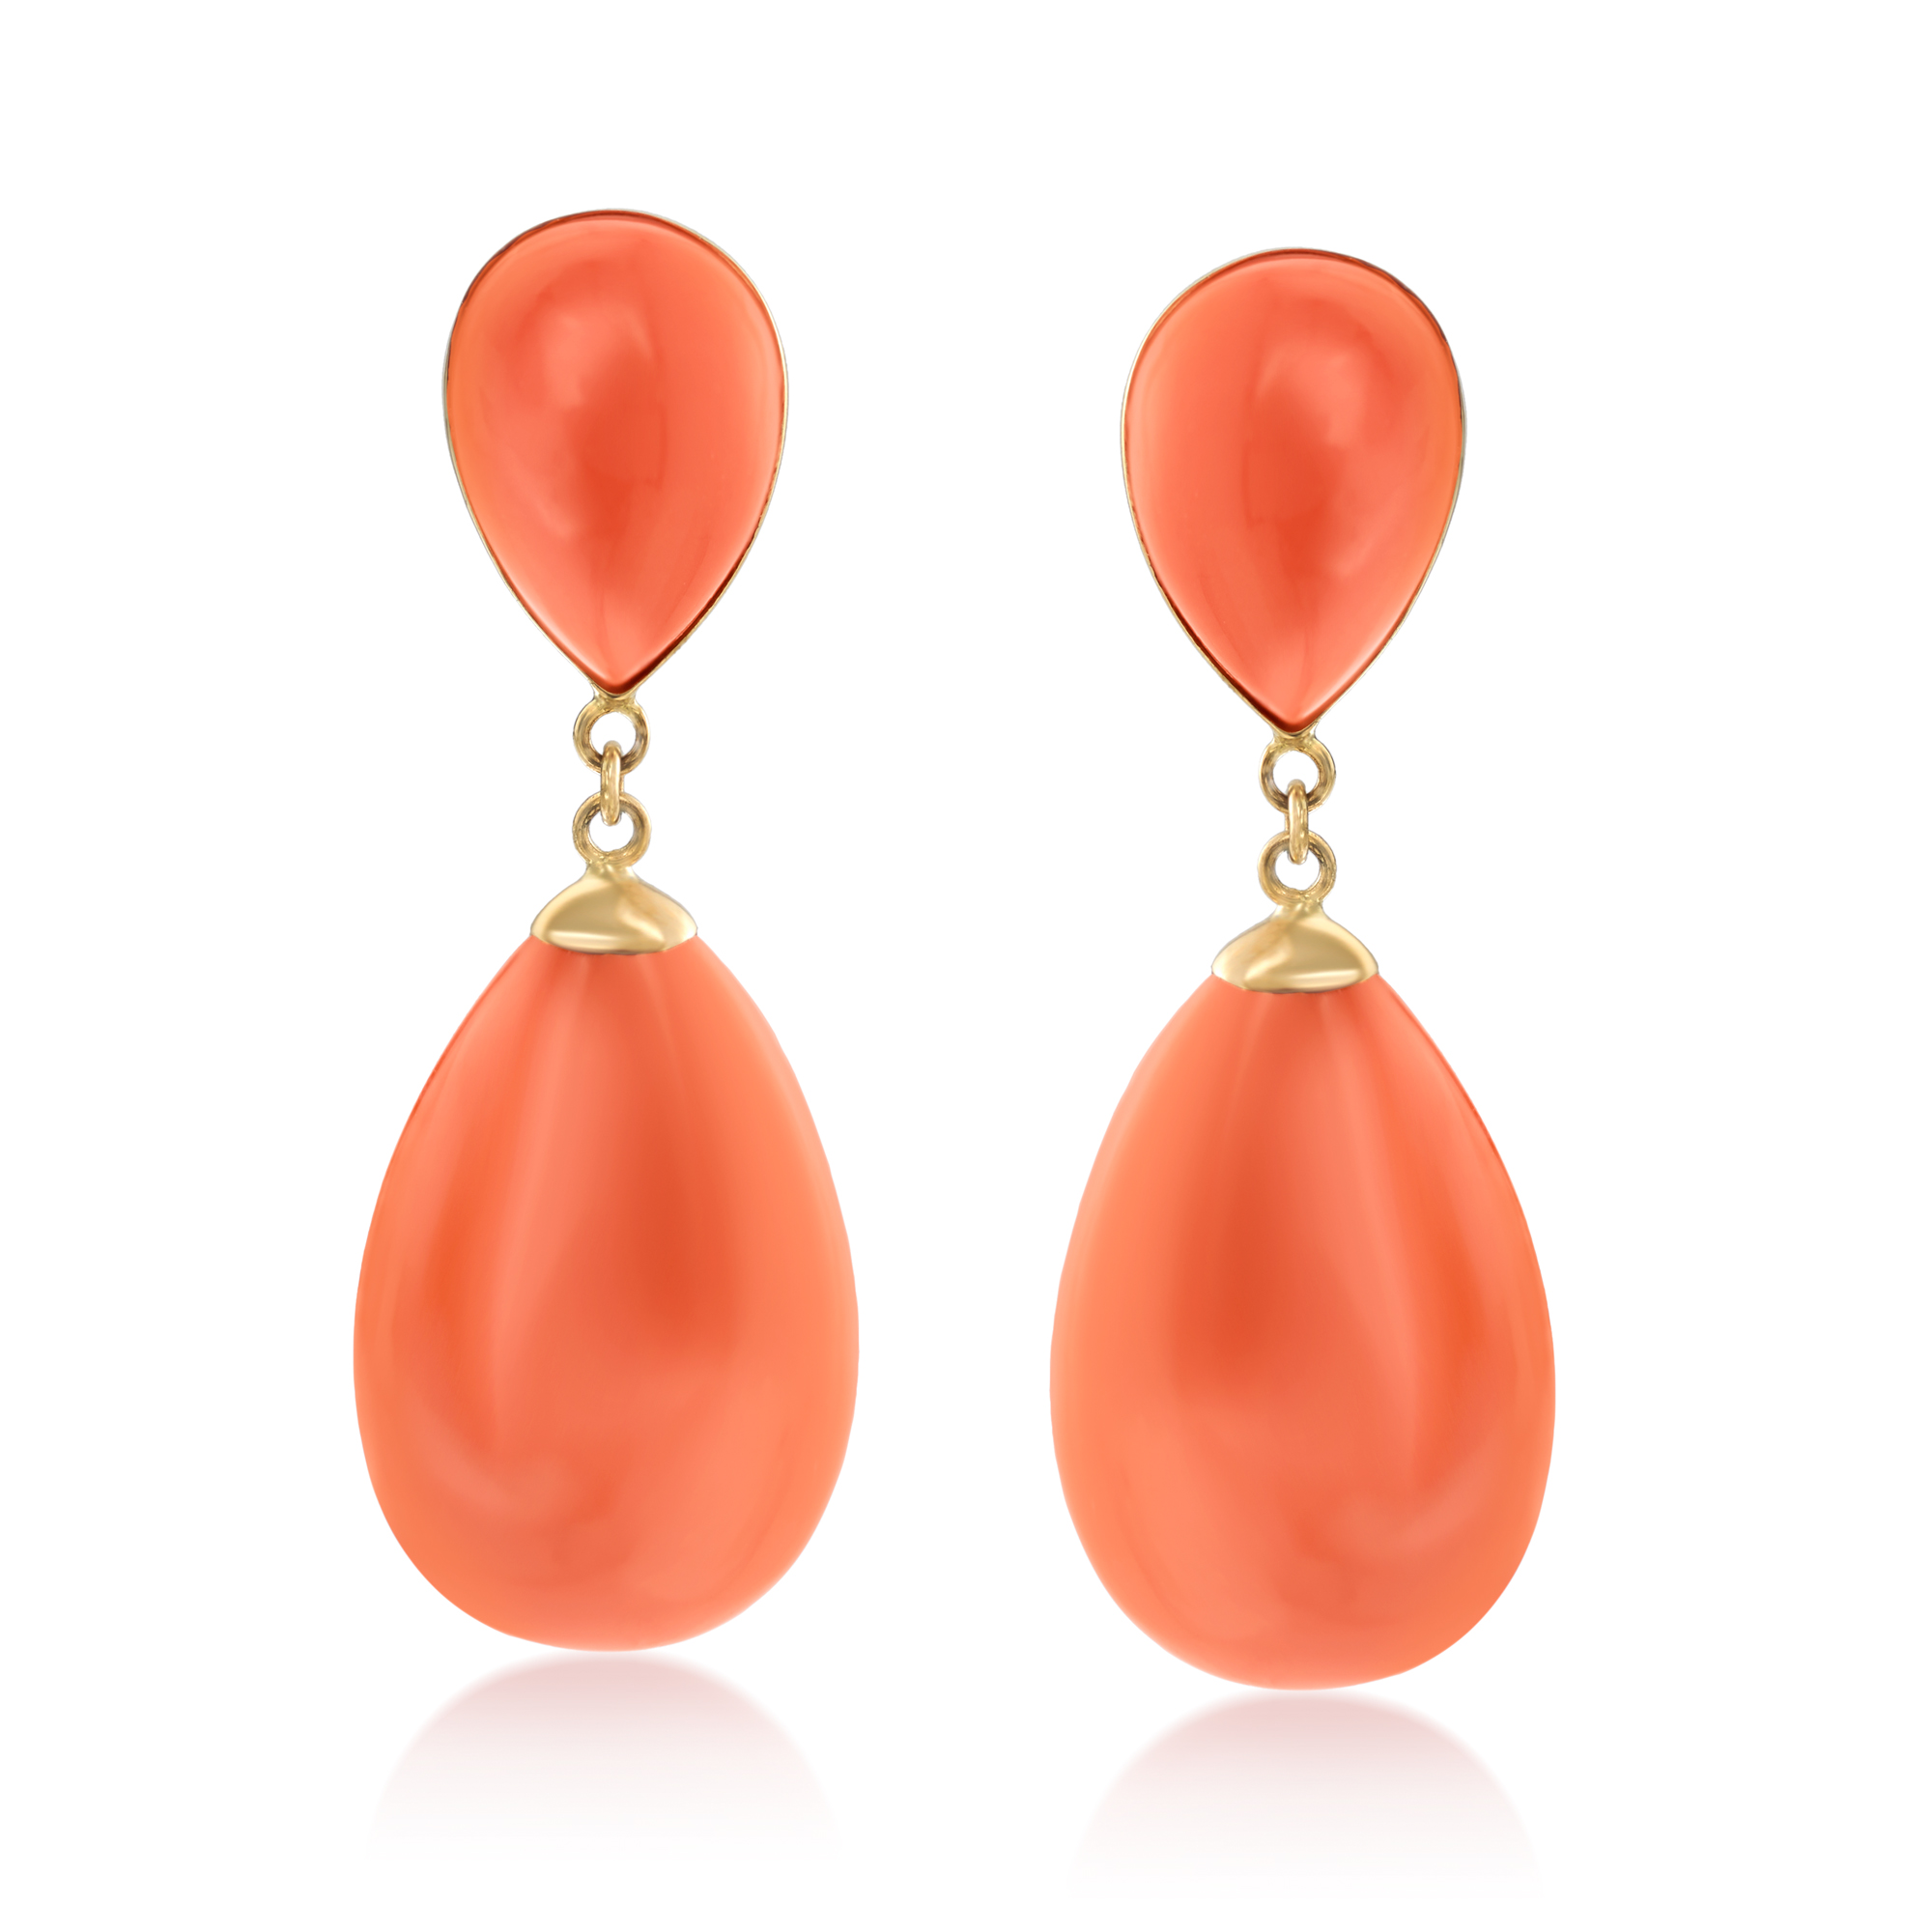 Simulated Coral Drop Earrings in 14kt Yellow Gold | Ross-Simons